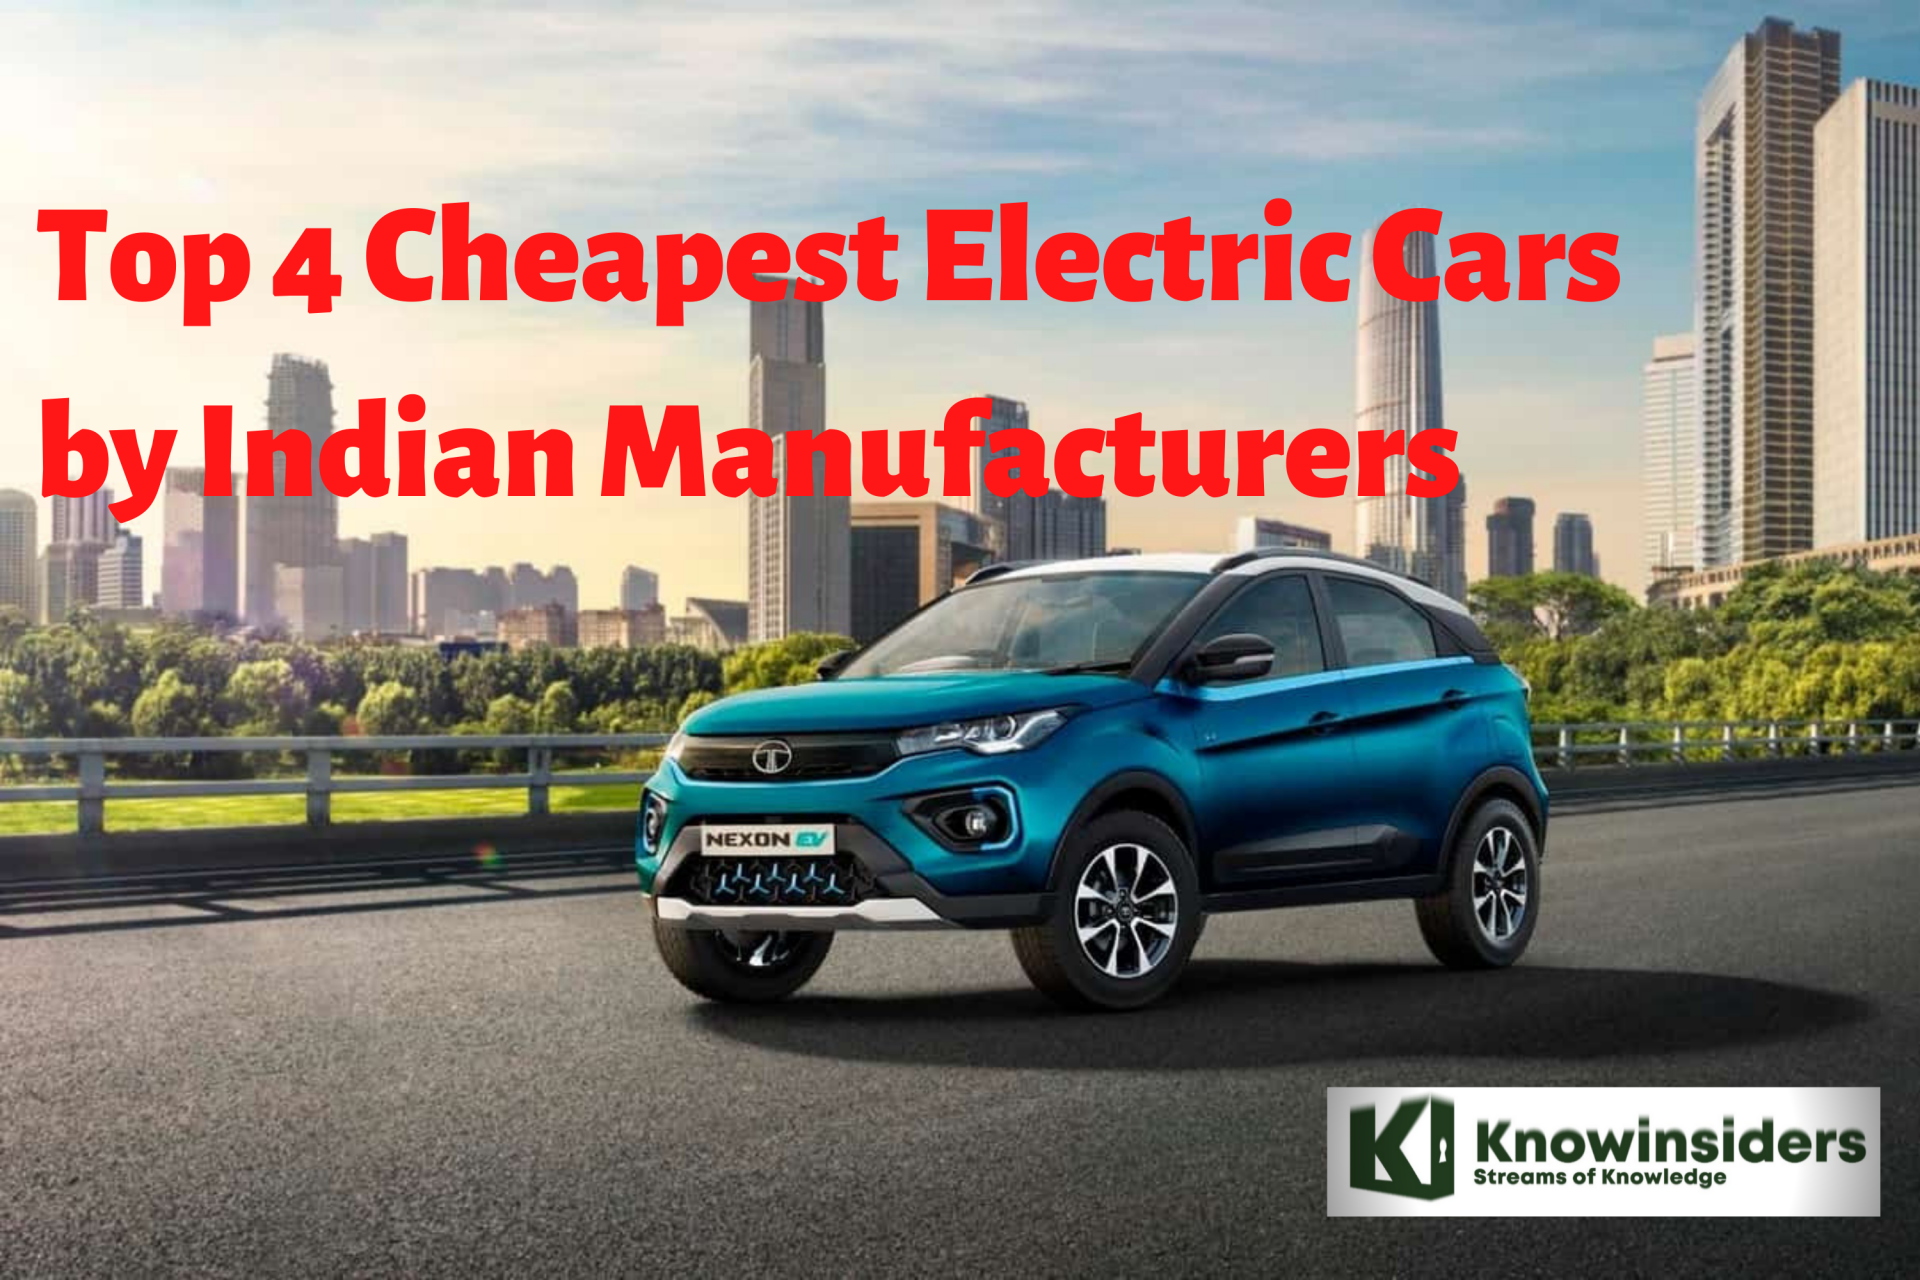 Top 4 Electric Cars - The Cheapest From Indian Manufacturers